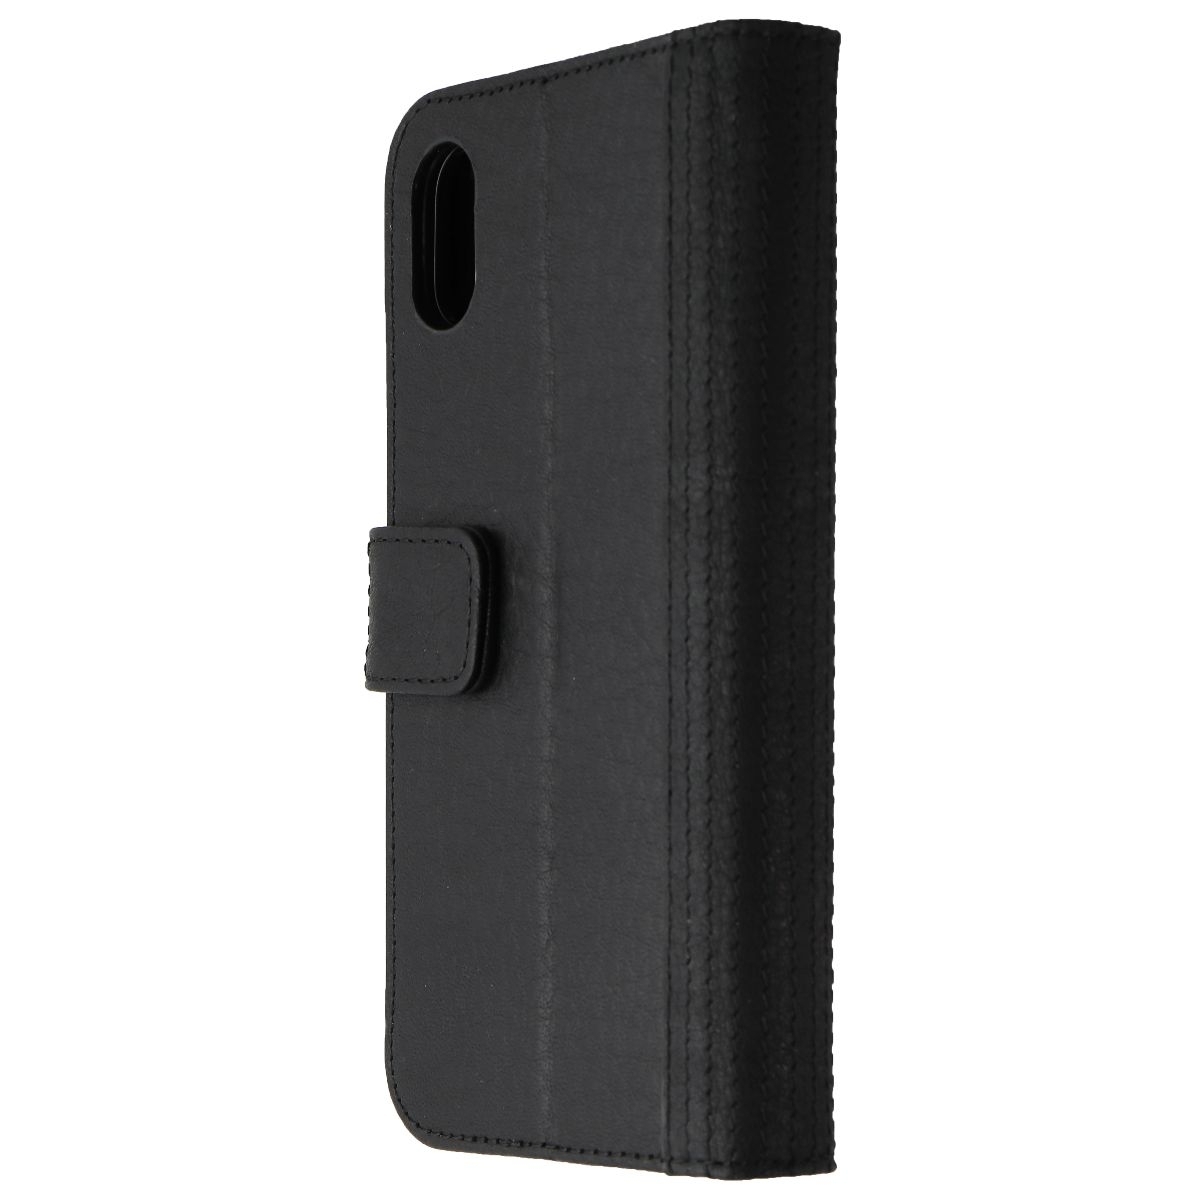 DECODED Full Grain Leather 2-in-1 Wallet For IPhone Xs/X - Rough Black (Refurbished)